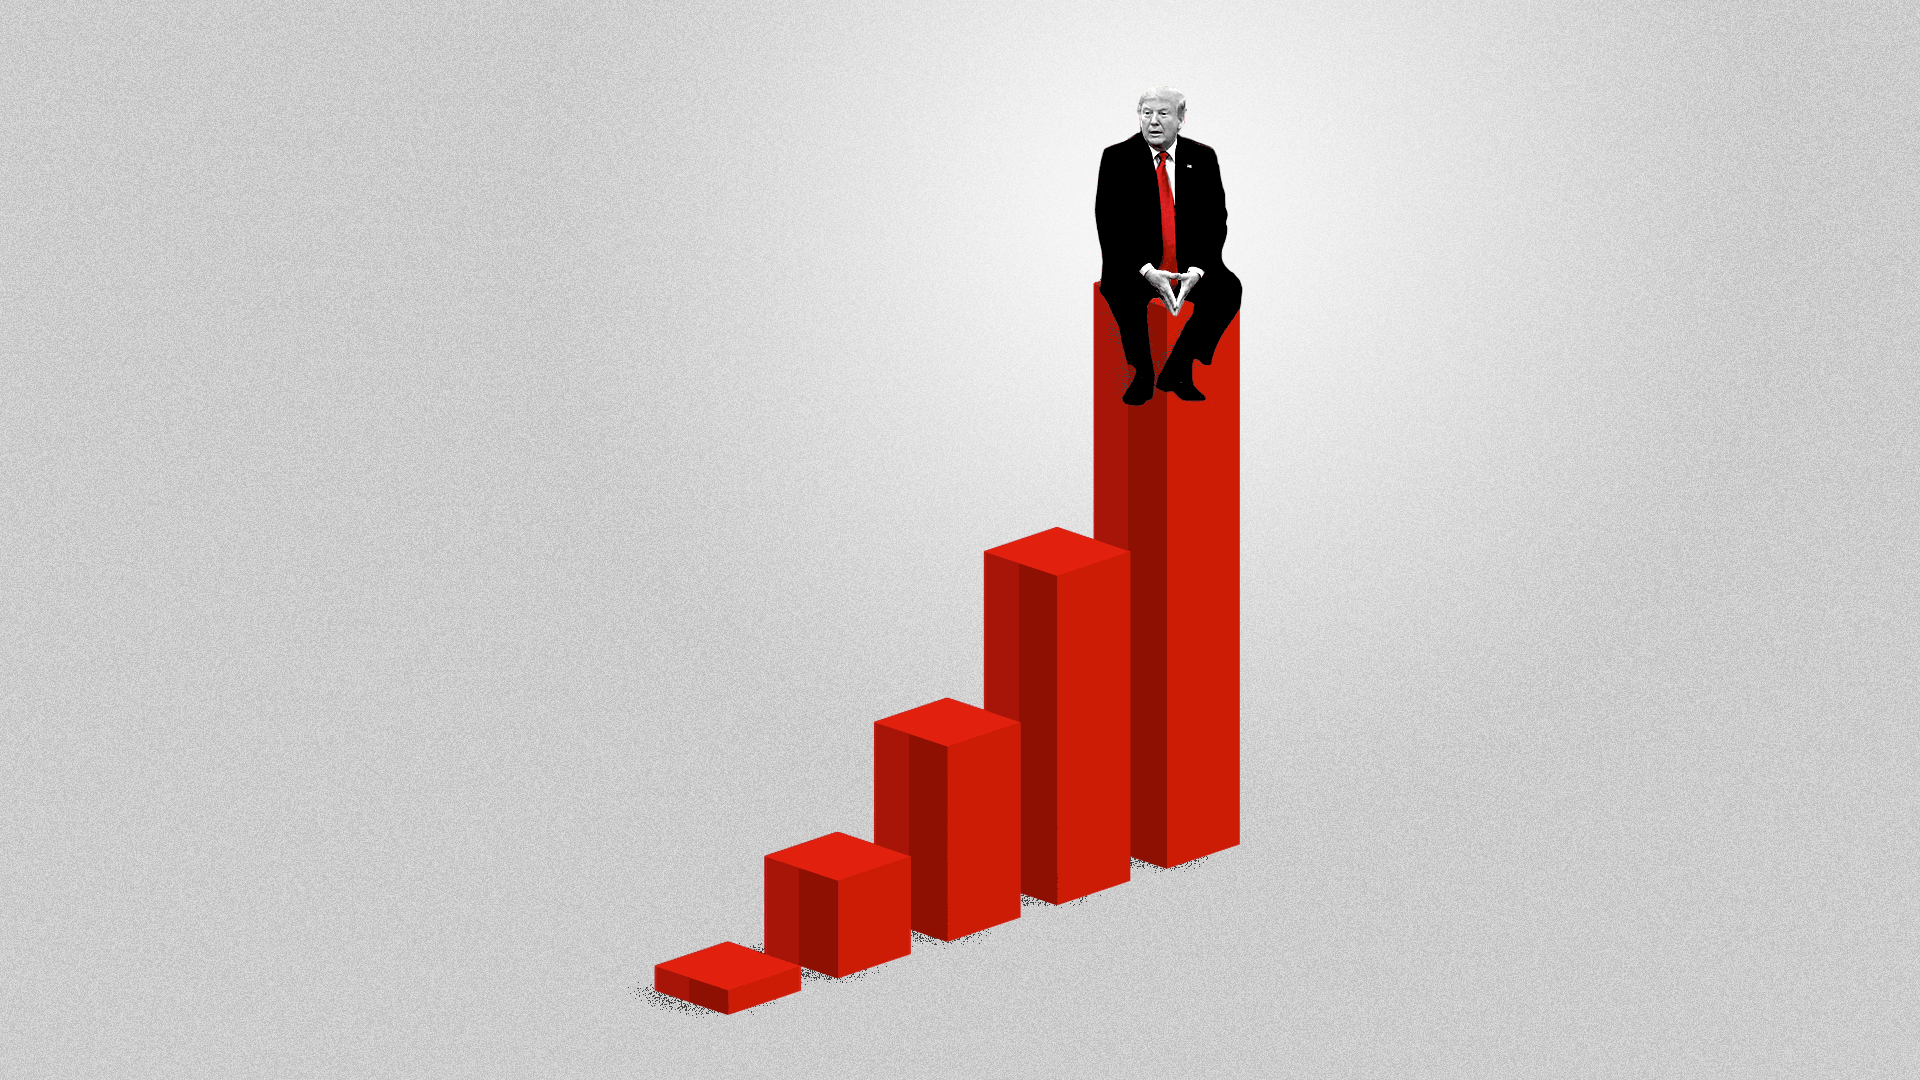 Illustration of President Trump sitting on the tallest of five bars of a bar chart.